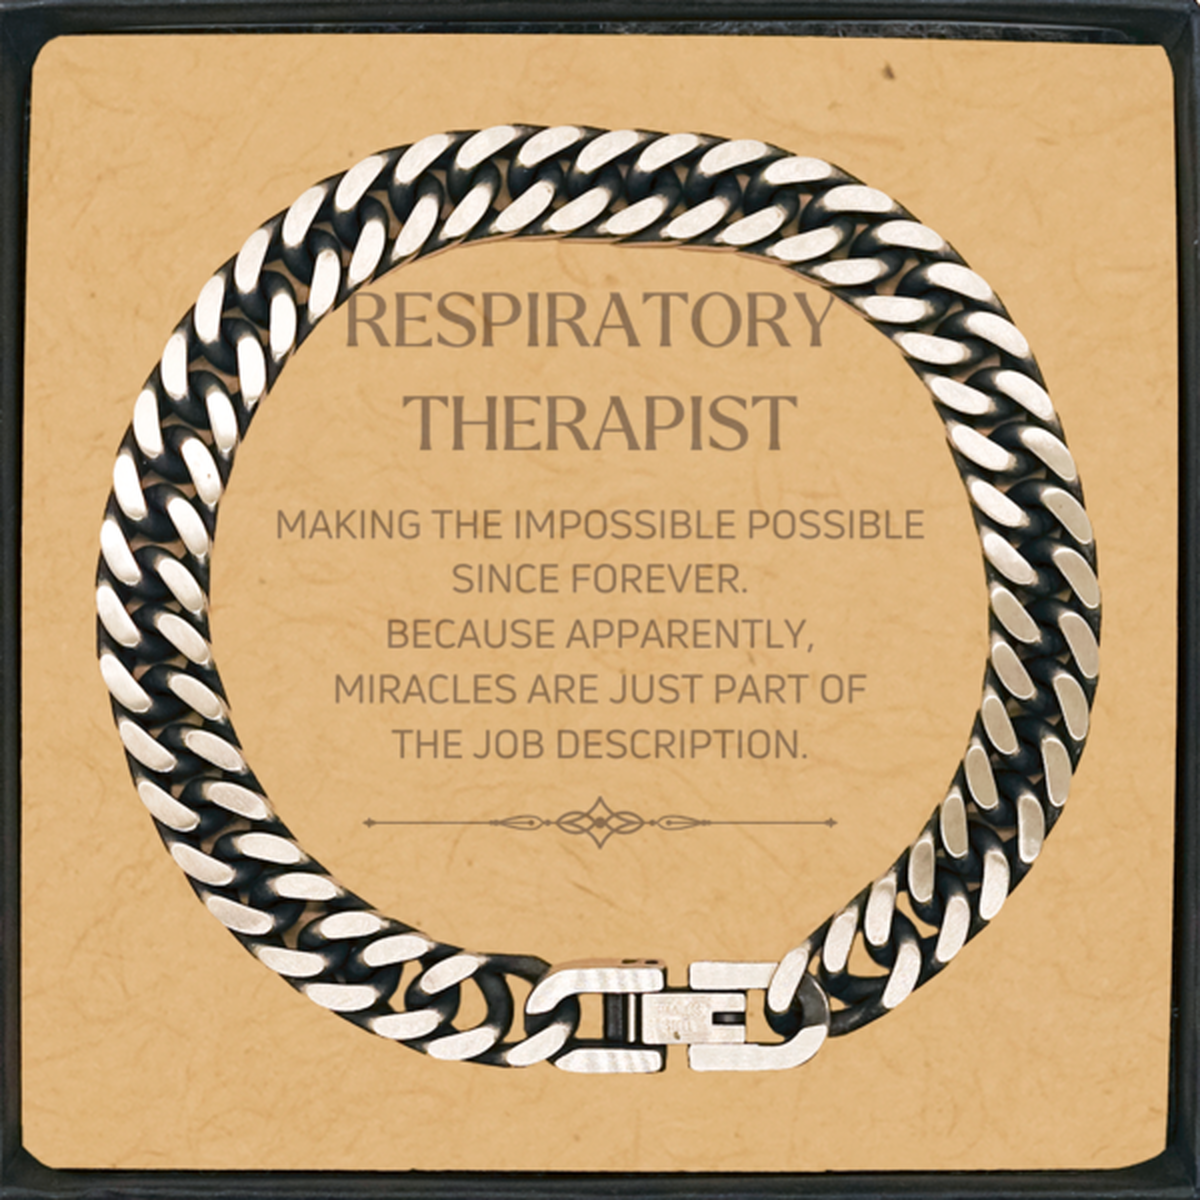 Funny Respiratory Therapist Gifts, Miracles are just part of the job description, Inspirational Birthday Cuban Link Chain Bracelet For Respiratory Therapist, Men, Women, Coworkers, Friends, Boss